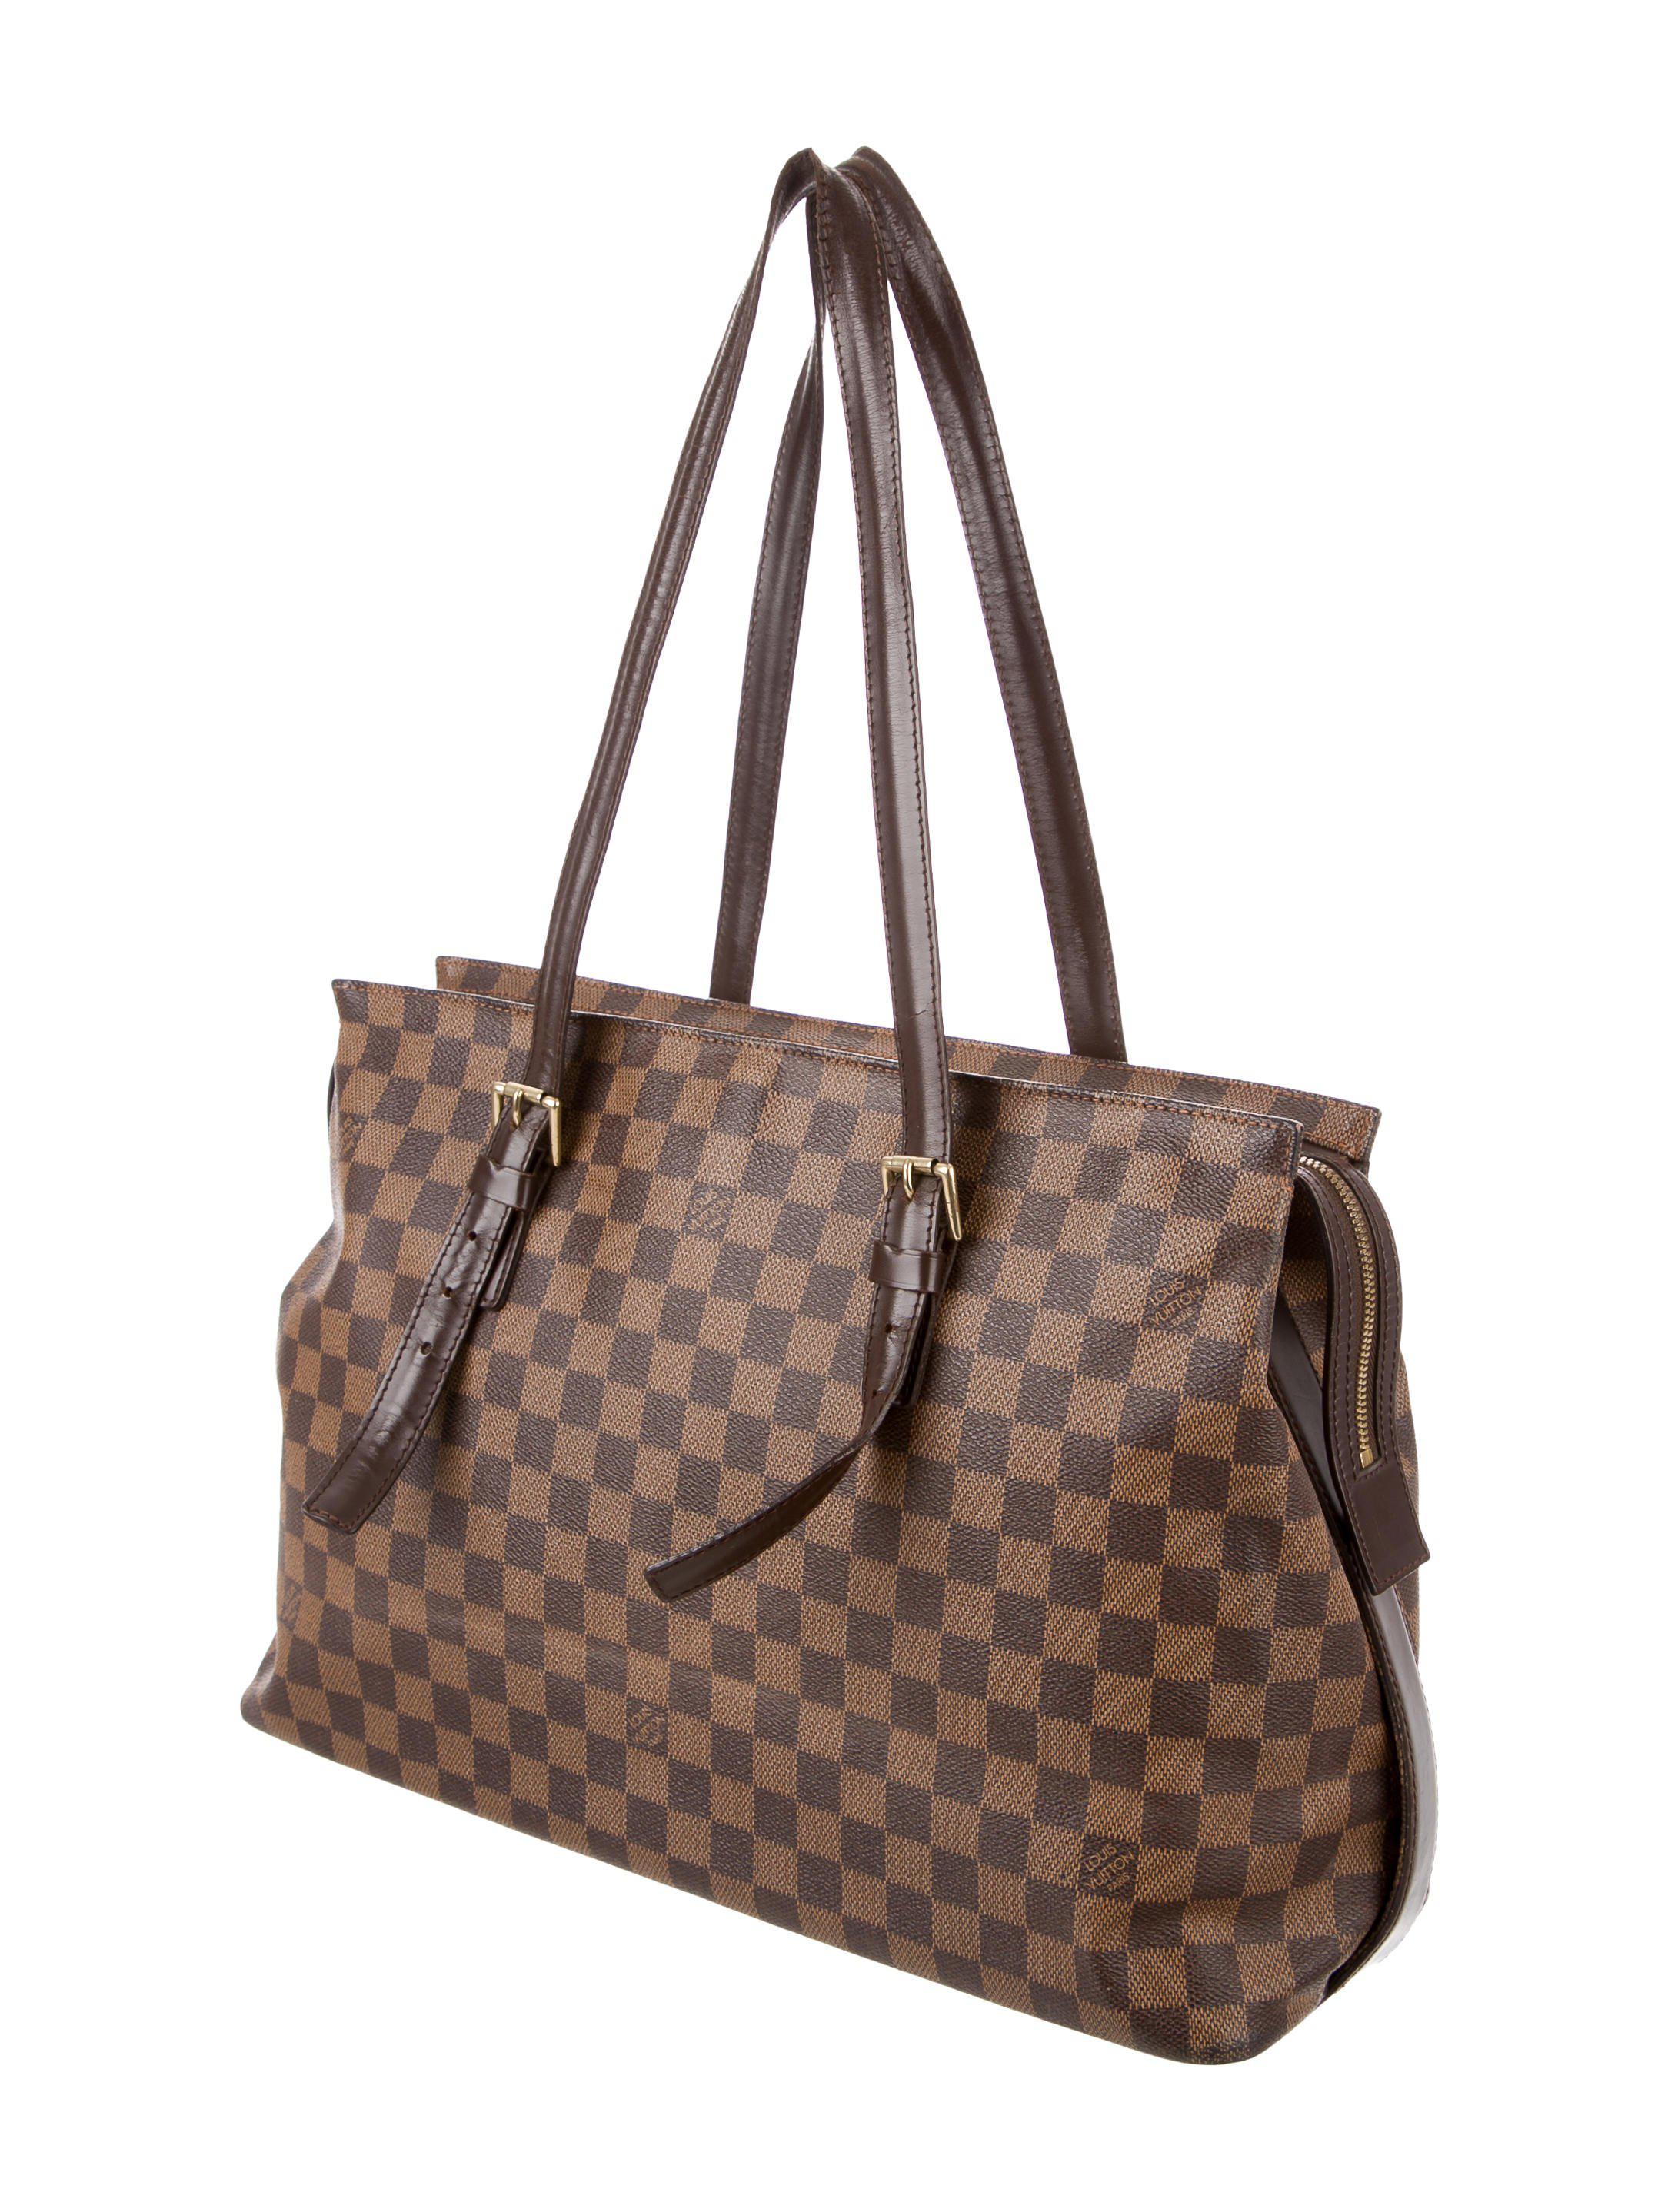 Lyst - Louis Vuitton Damier Ebene Chelsea Tote Brown in Natural